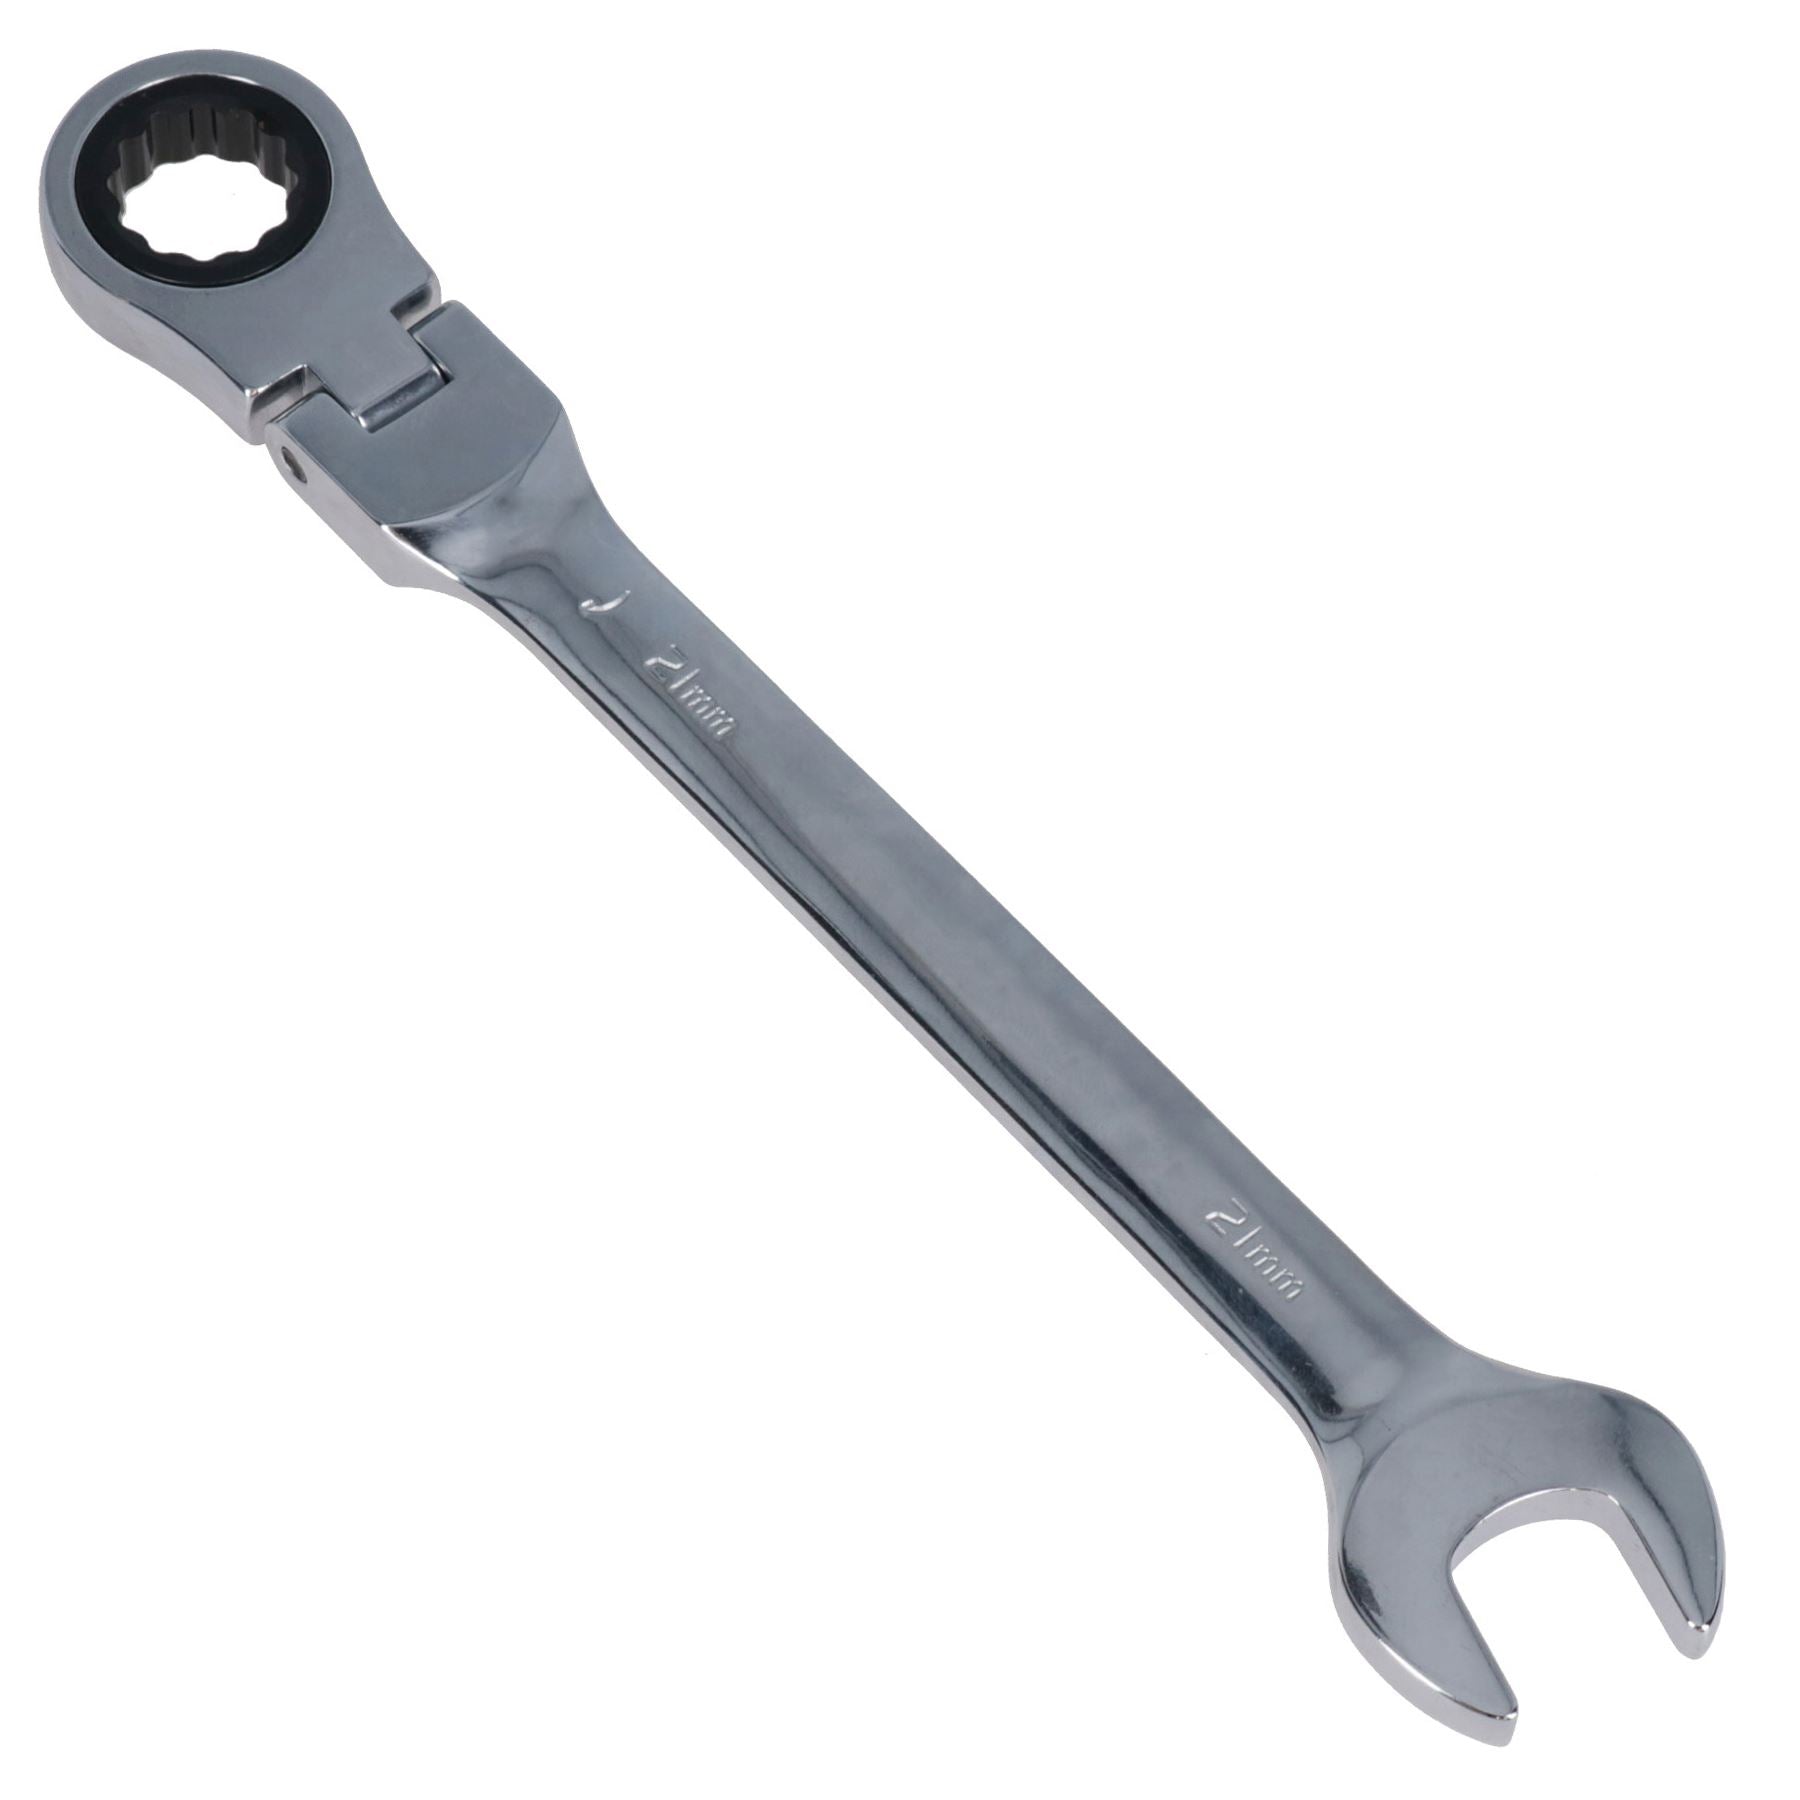 21mm Metric Flexible Combination Ratchet Spanner wrench 12 Sided 72 Teeth